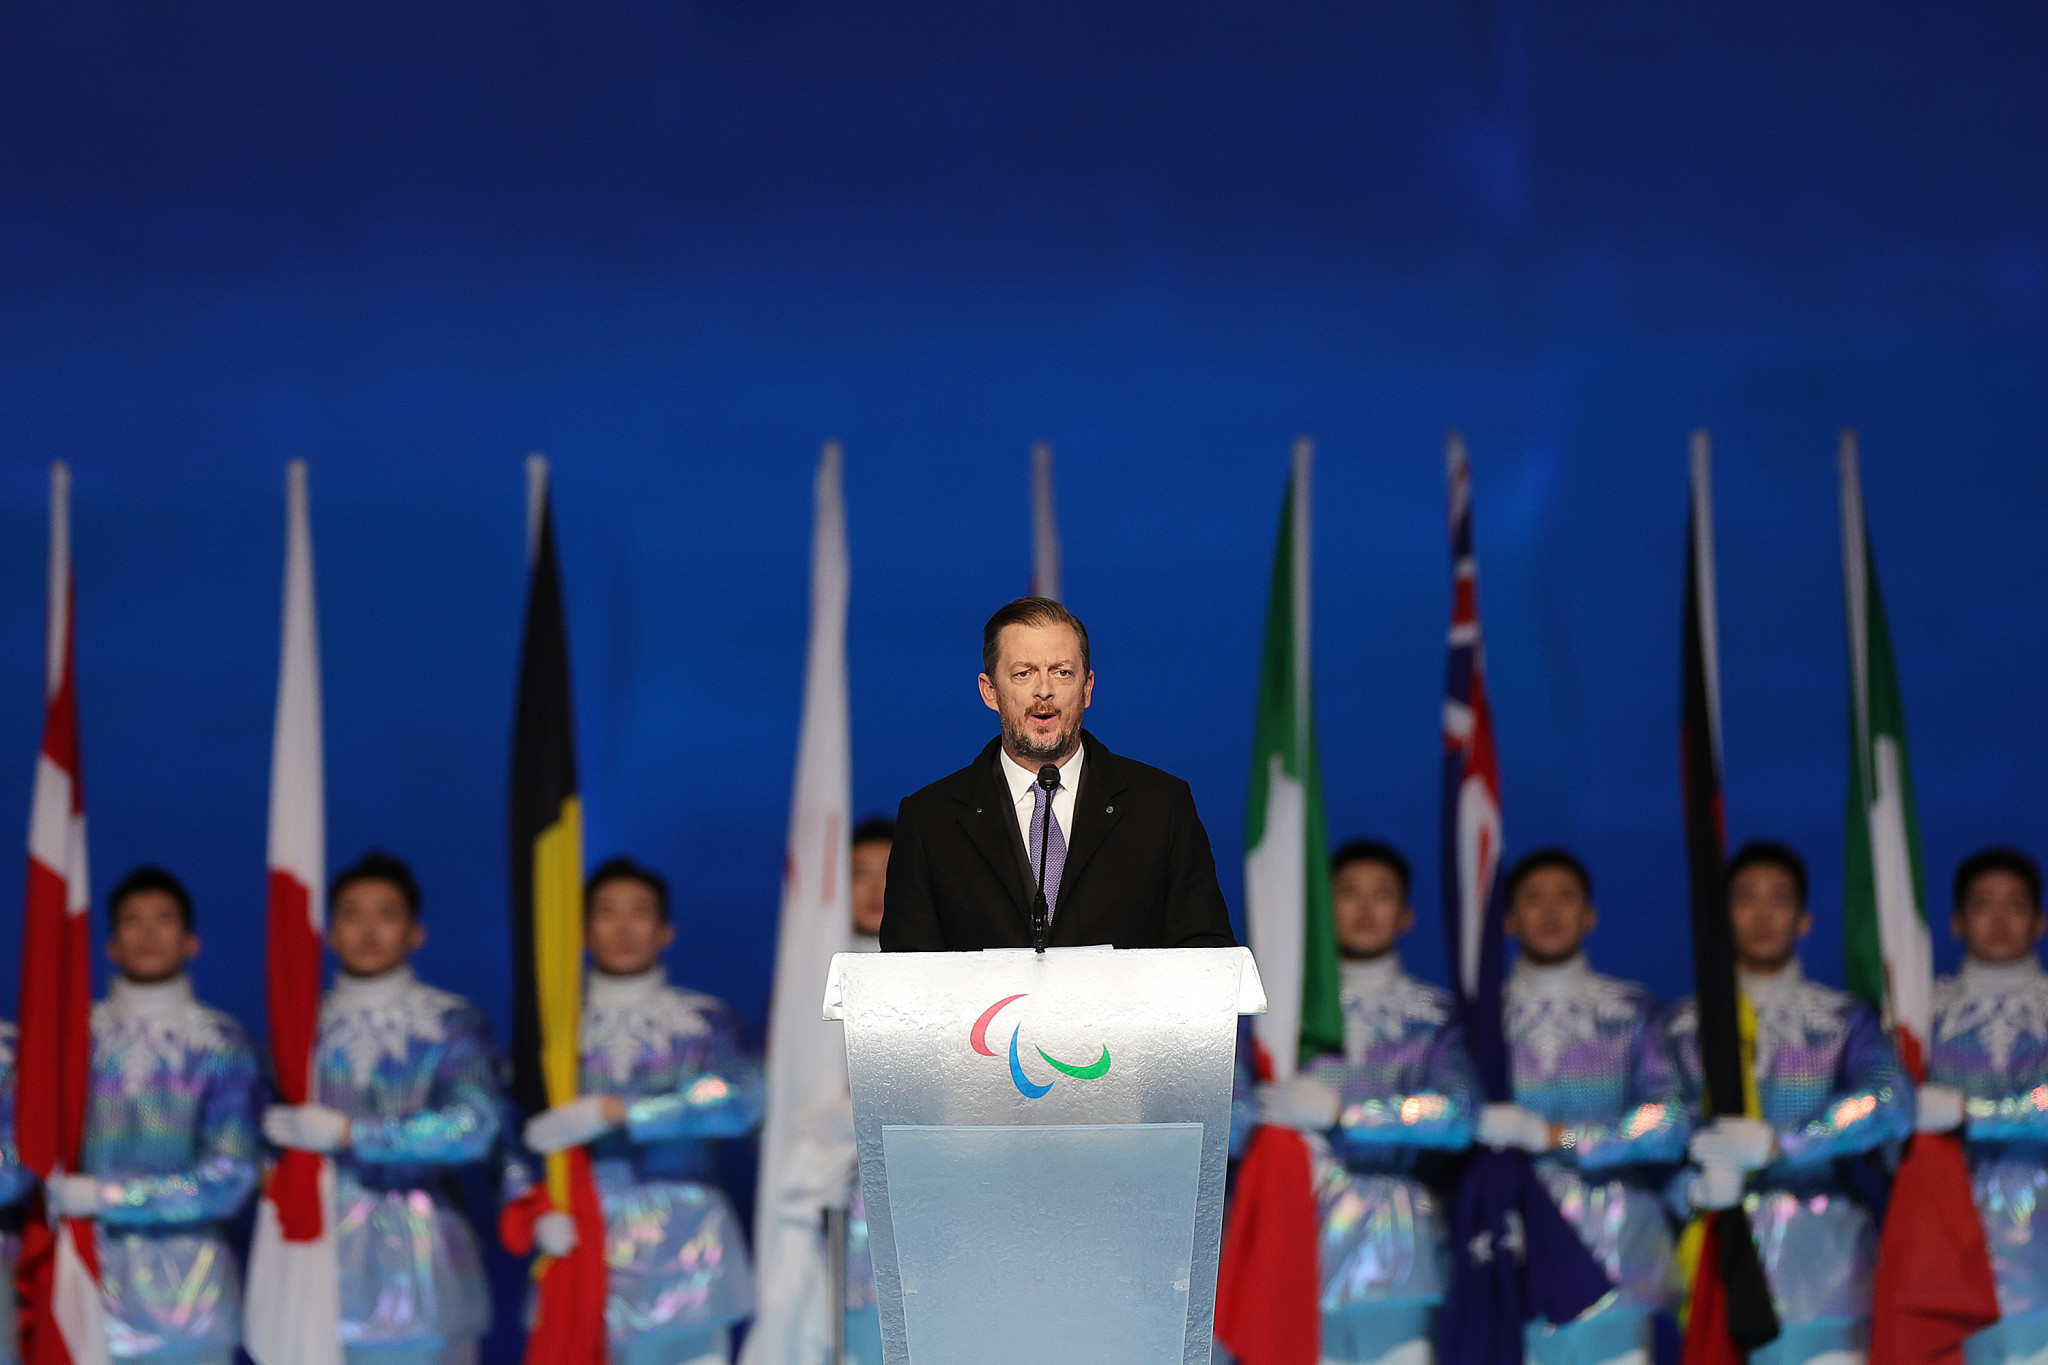 International Paralympic Committee President Andrew Parsons insisted the ban on Russia and Belarus was necessary to protect the 